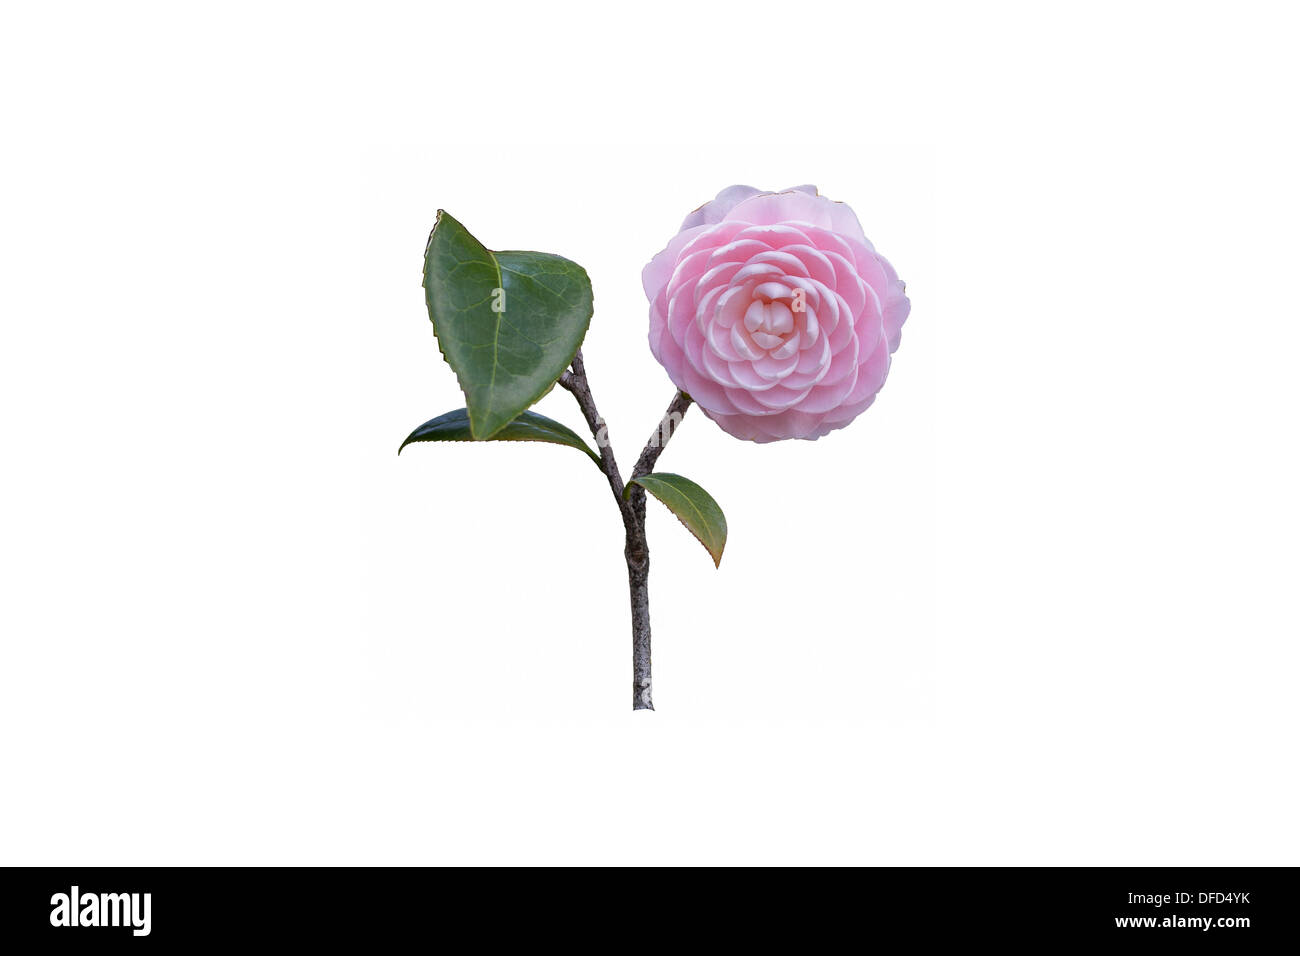 This image is of a single pink camellia and leaves isolated on a white background. Stock Photo